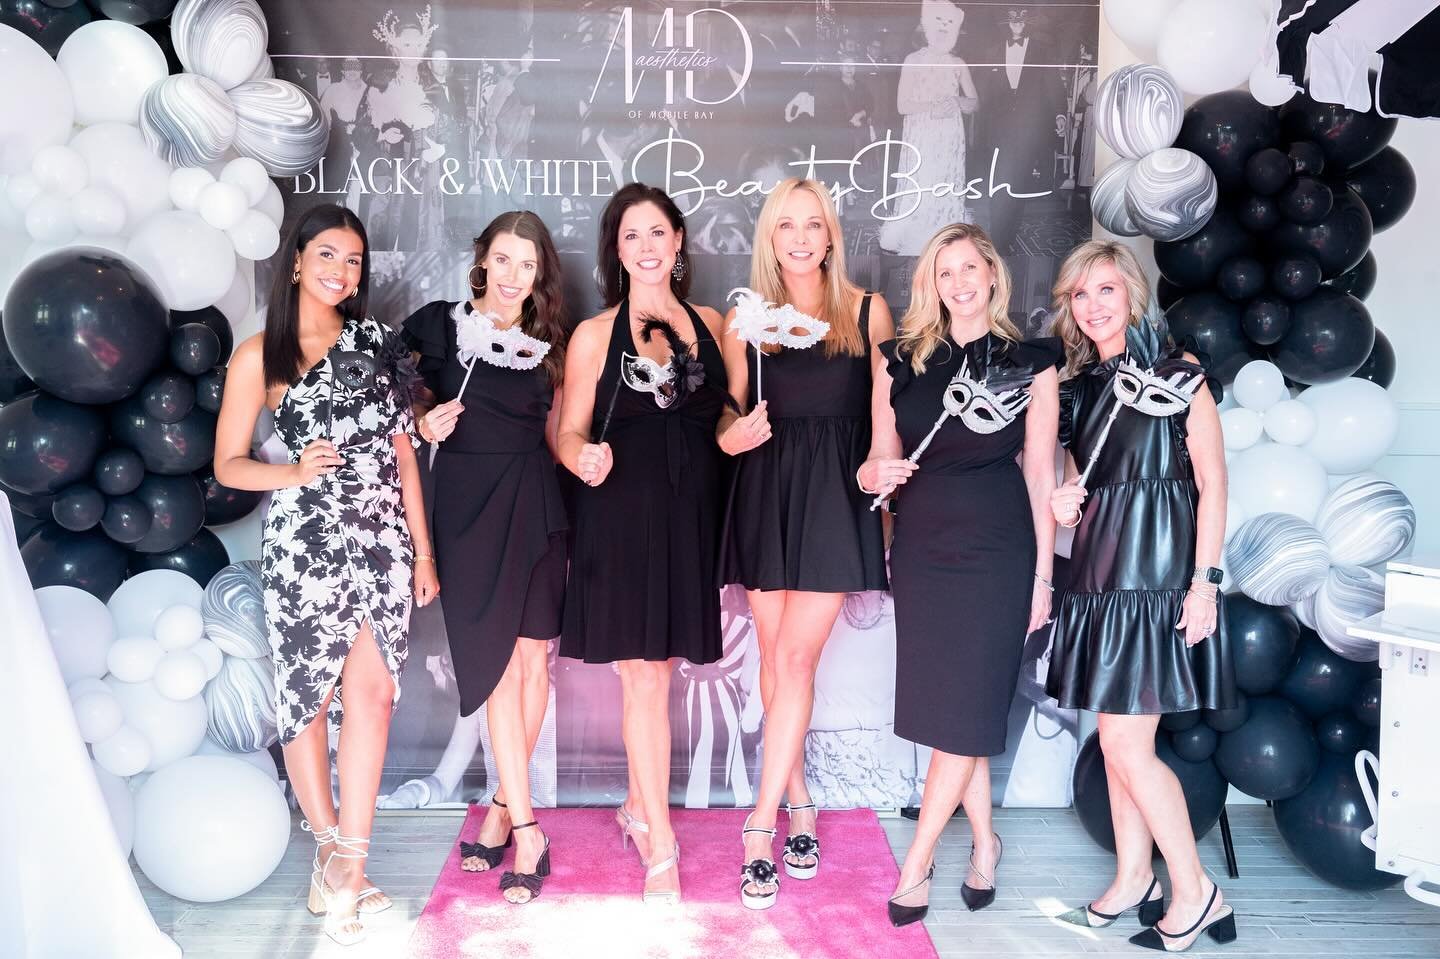 Fairhope&rsquo;s MD Aesthetics of Mobile Bay is not only known for their anti-aging expertise and superb beauty treatments, they&rsquo;re also revered for their events, too. Inspired by author Truman Capote&rsquo;s famous Black and White Ball and Hul